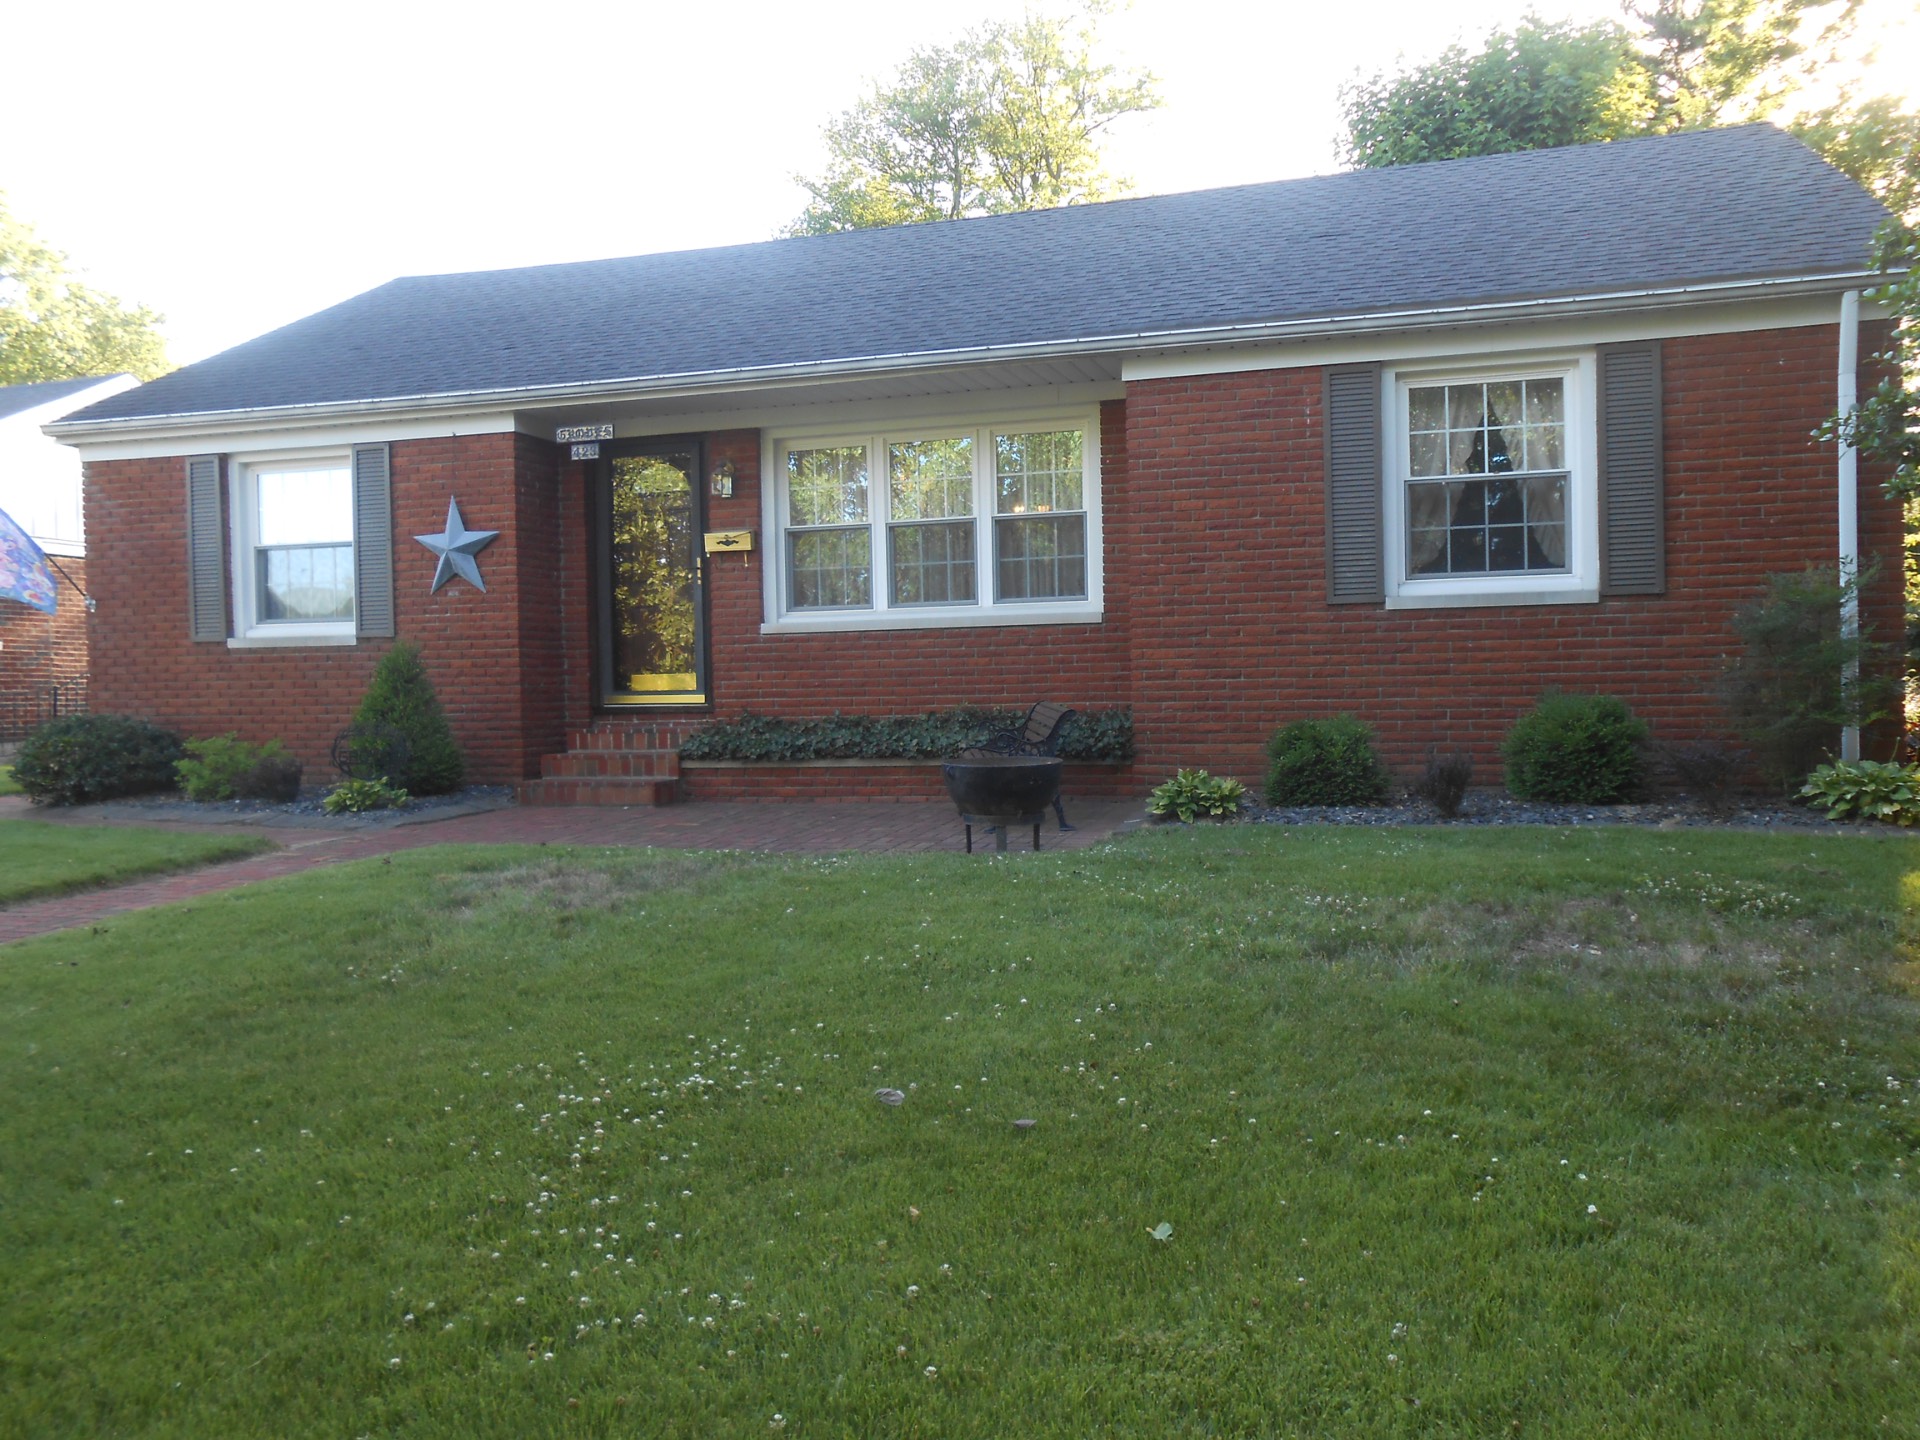 Immaculately Clean and Very Well Maintained Brick Home